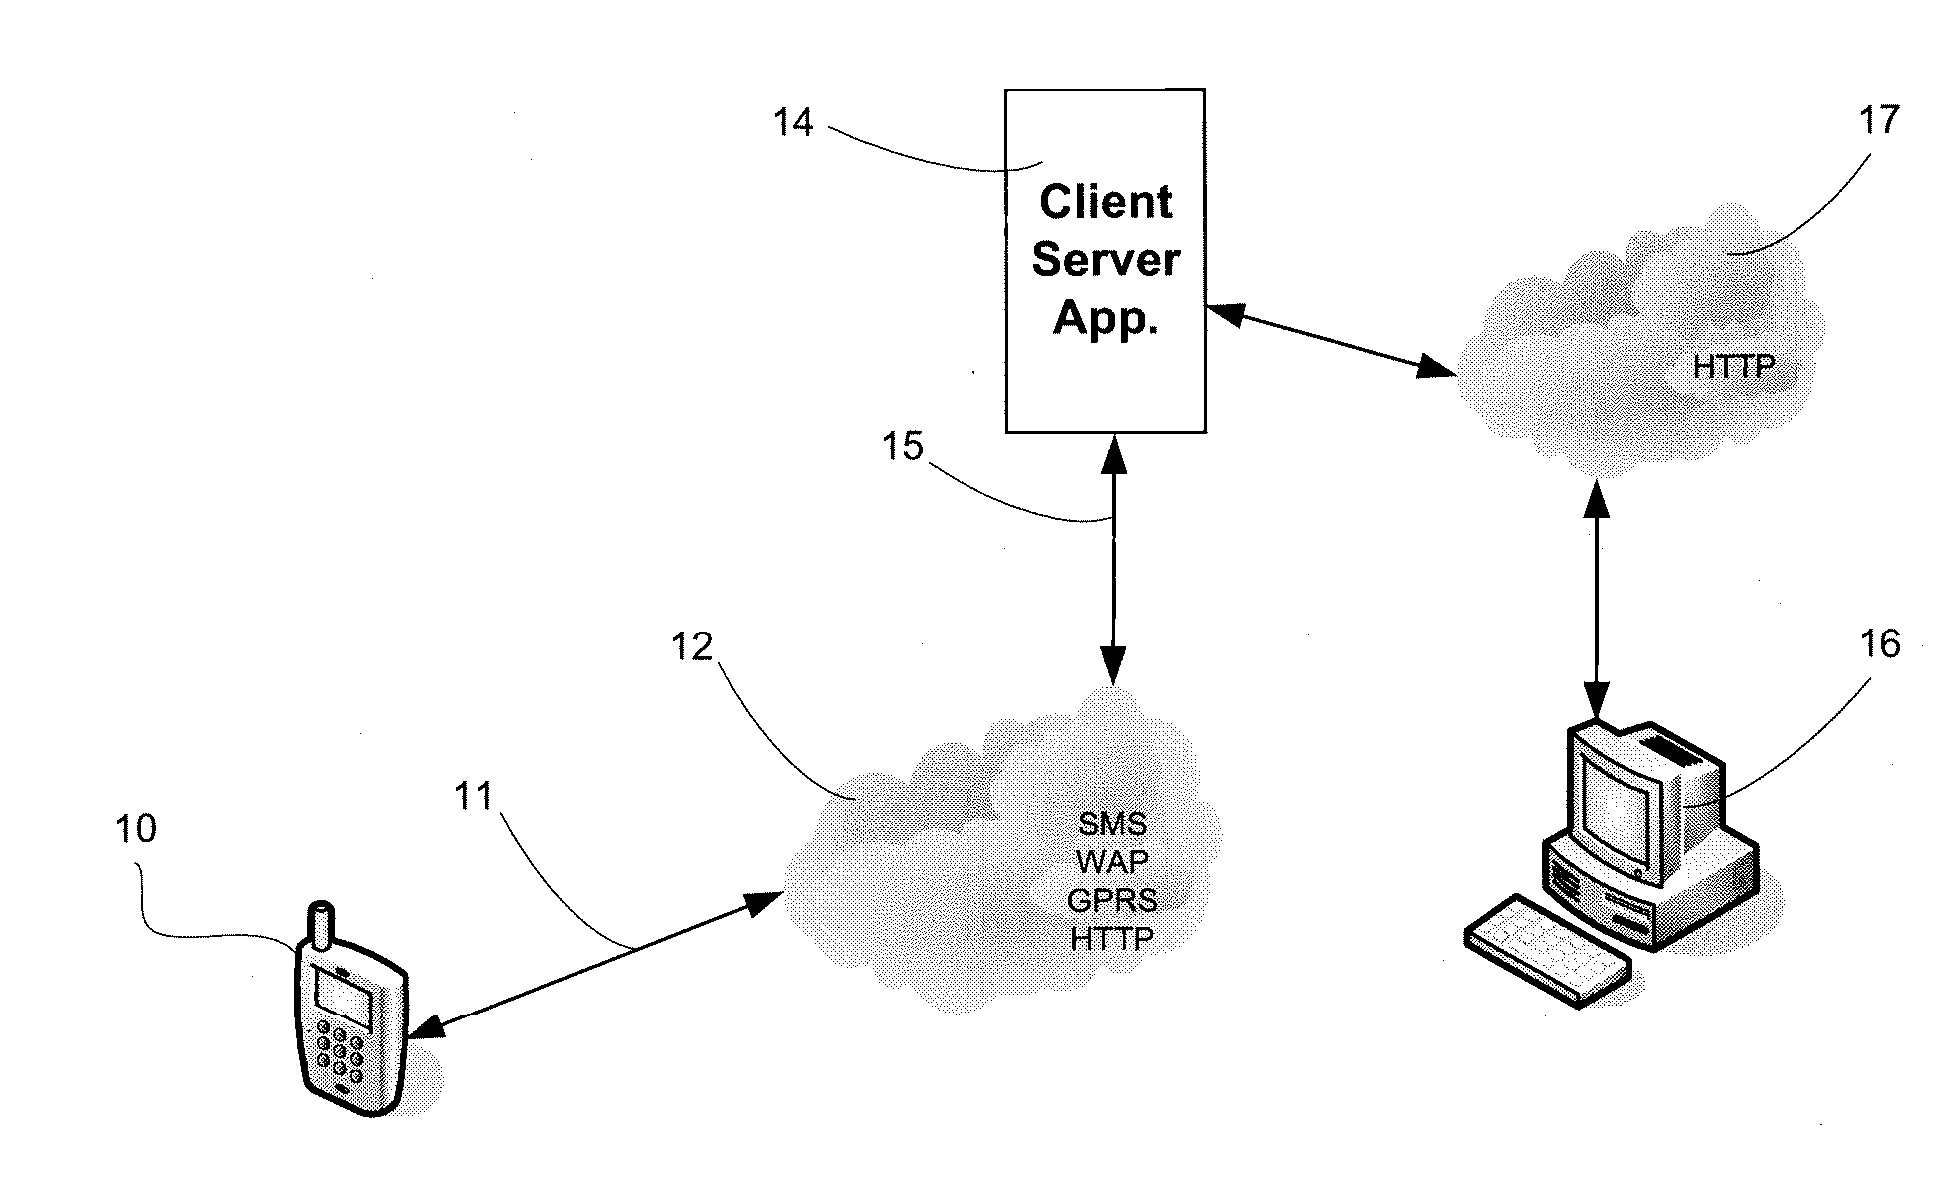 Platform for telephone-optimized data and voice services